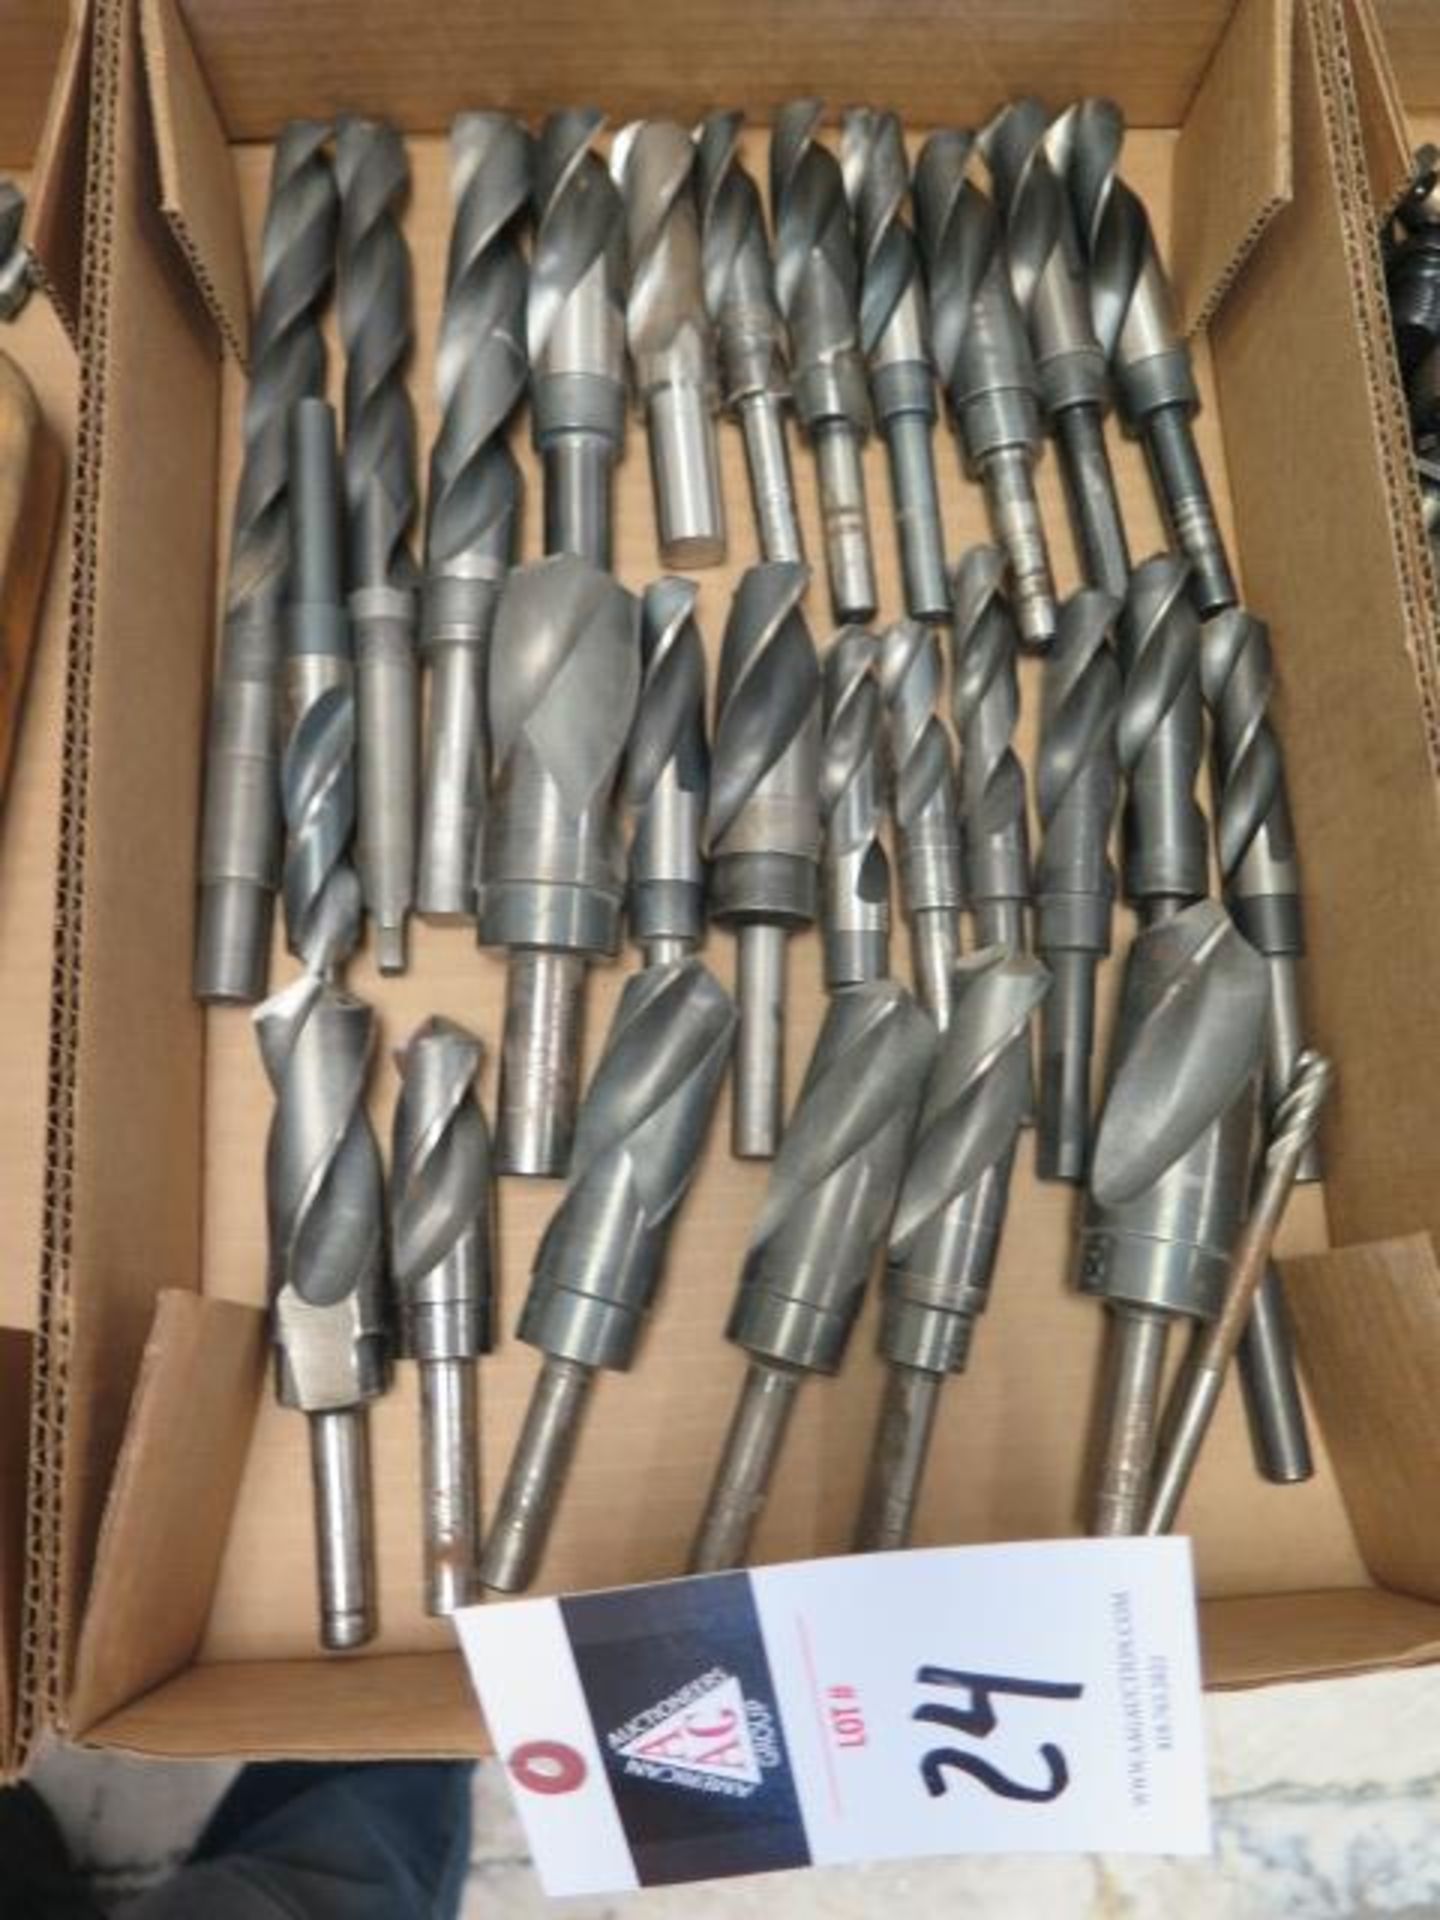 Reduced Shank Drills (SOLD AS-IS - NO WARRANTY)